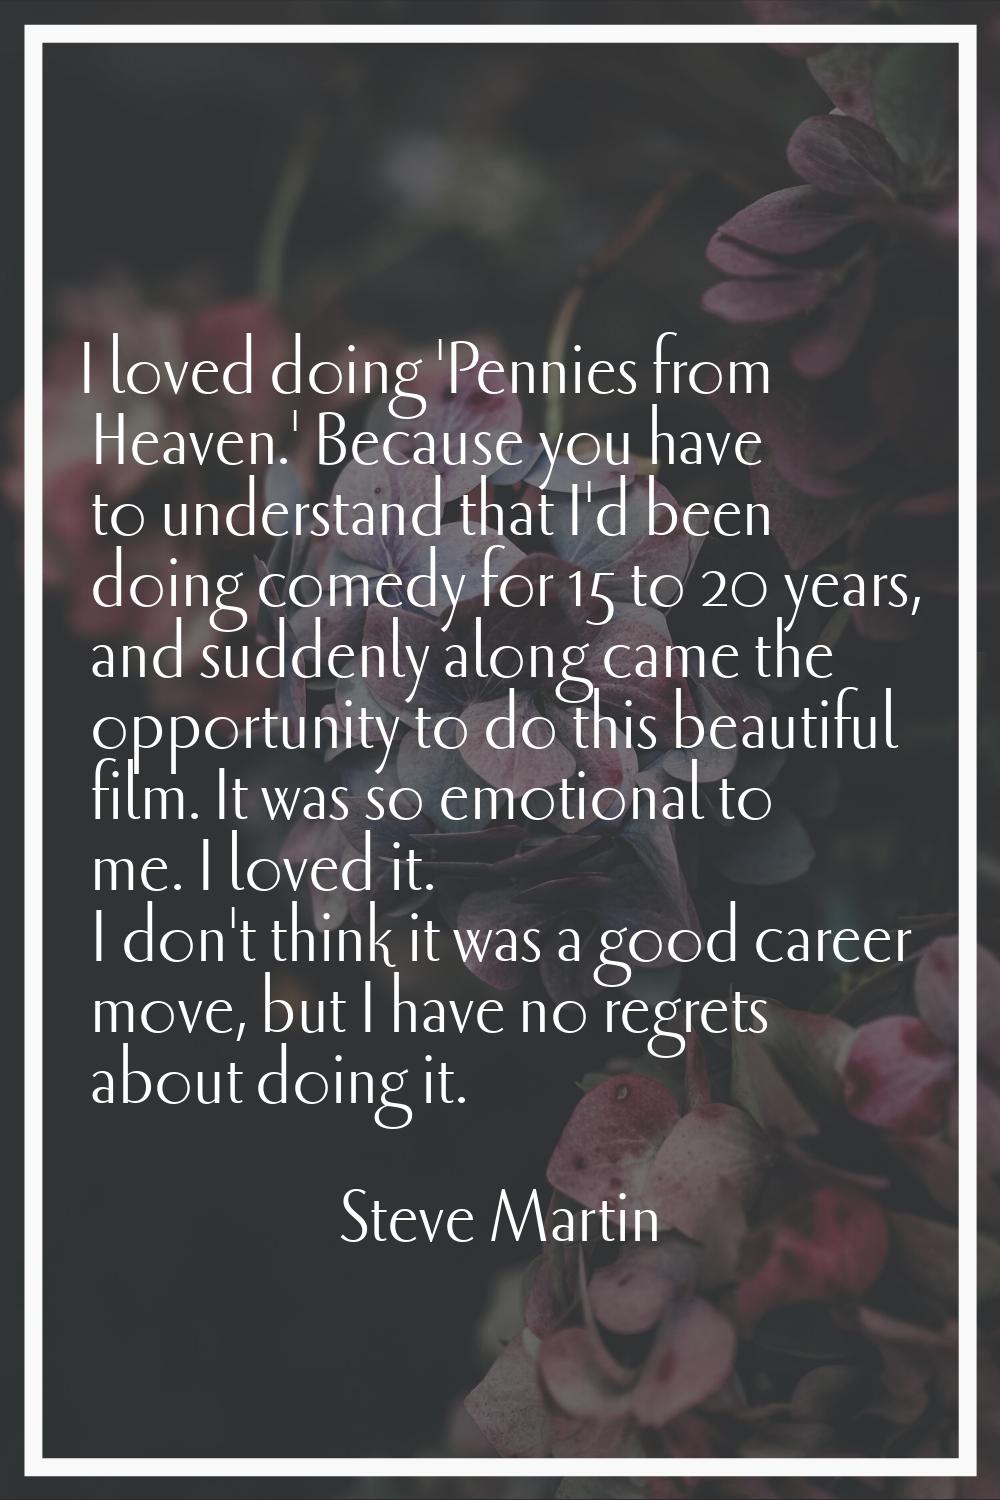 I loved doing 'Pennies from Heaven.' Because you have to understand that I'd been doing comedy for 